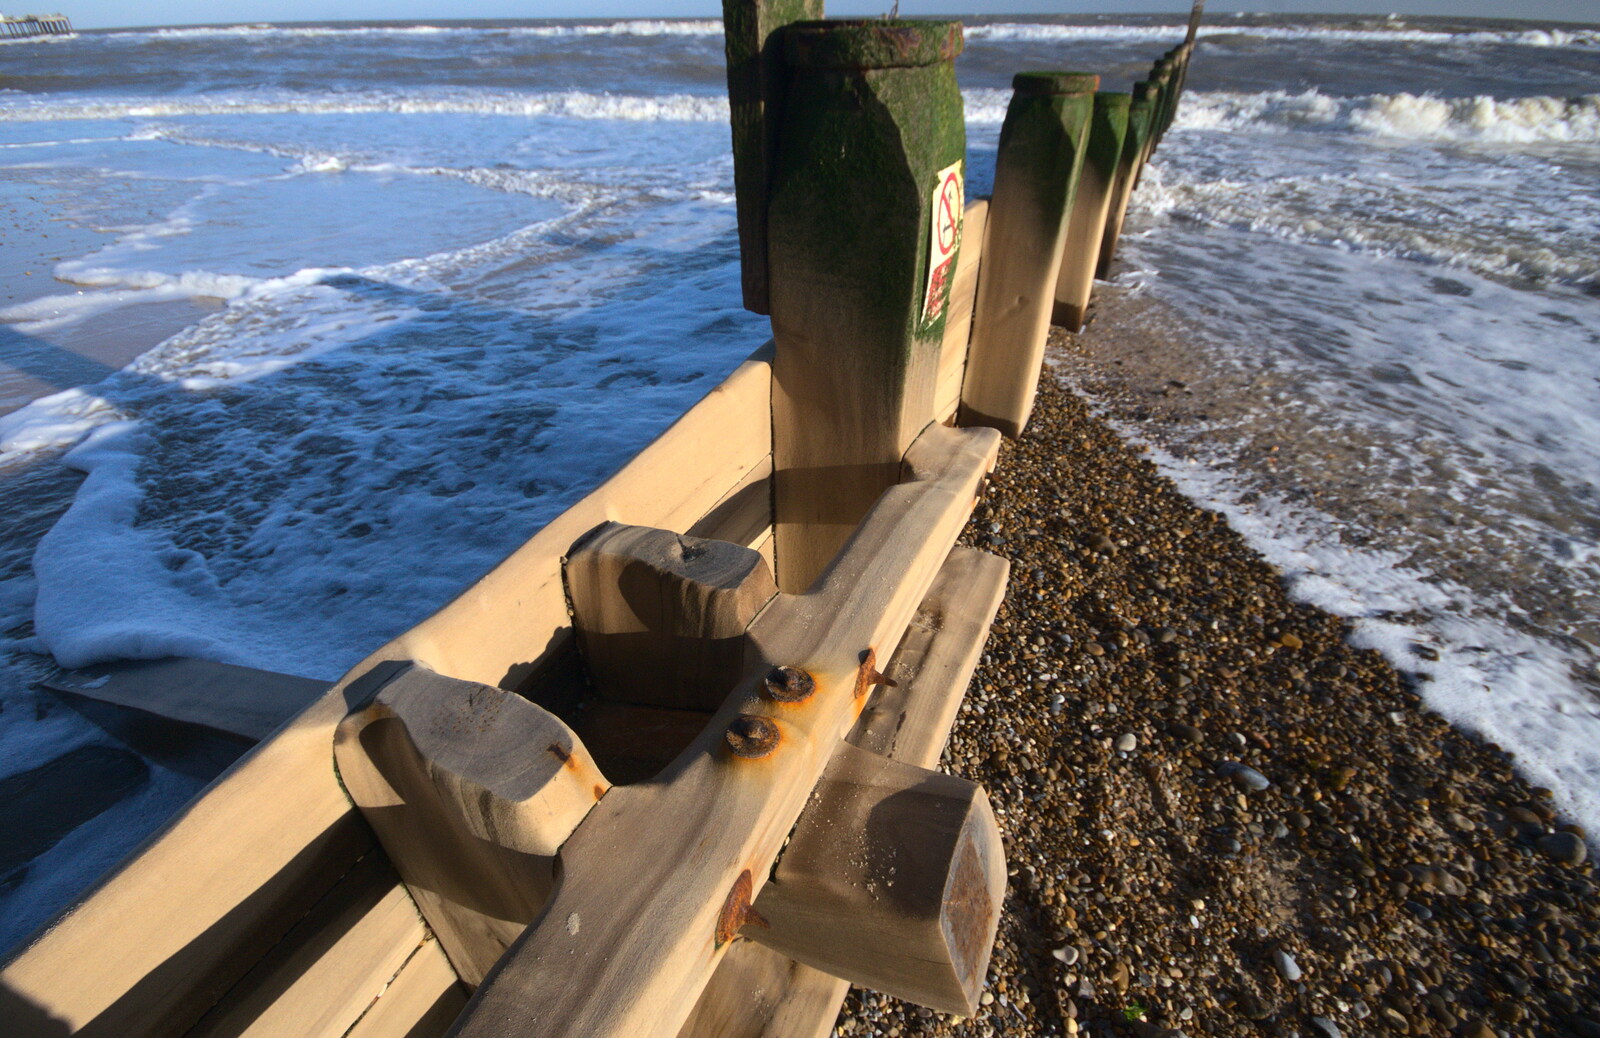 The groynes are getting fairly worn down by the sea from Sunset at the Beach, Southwold, Suffolk - 18th November 2018